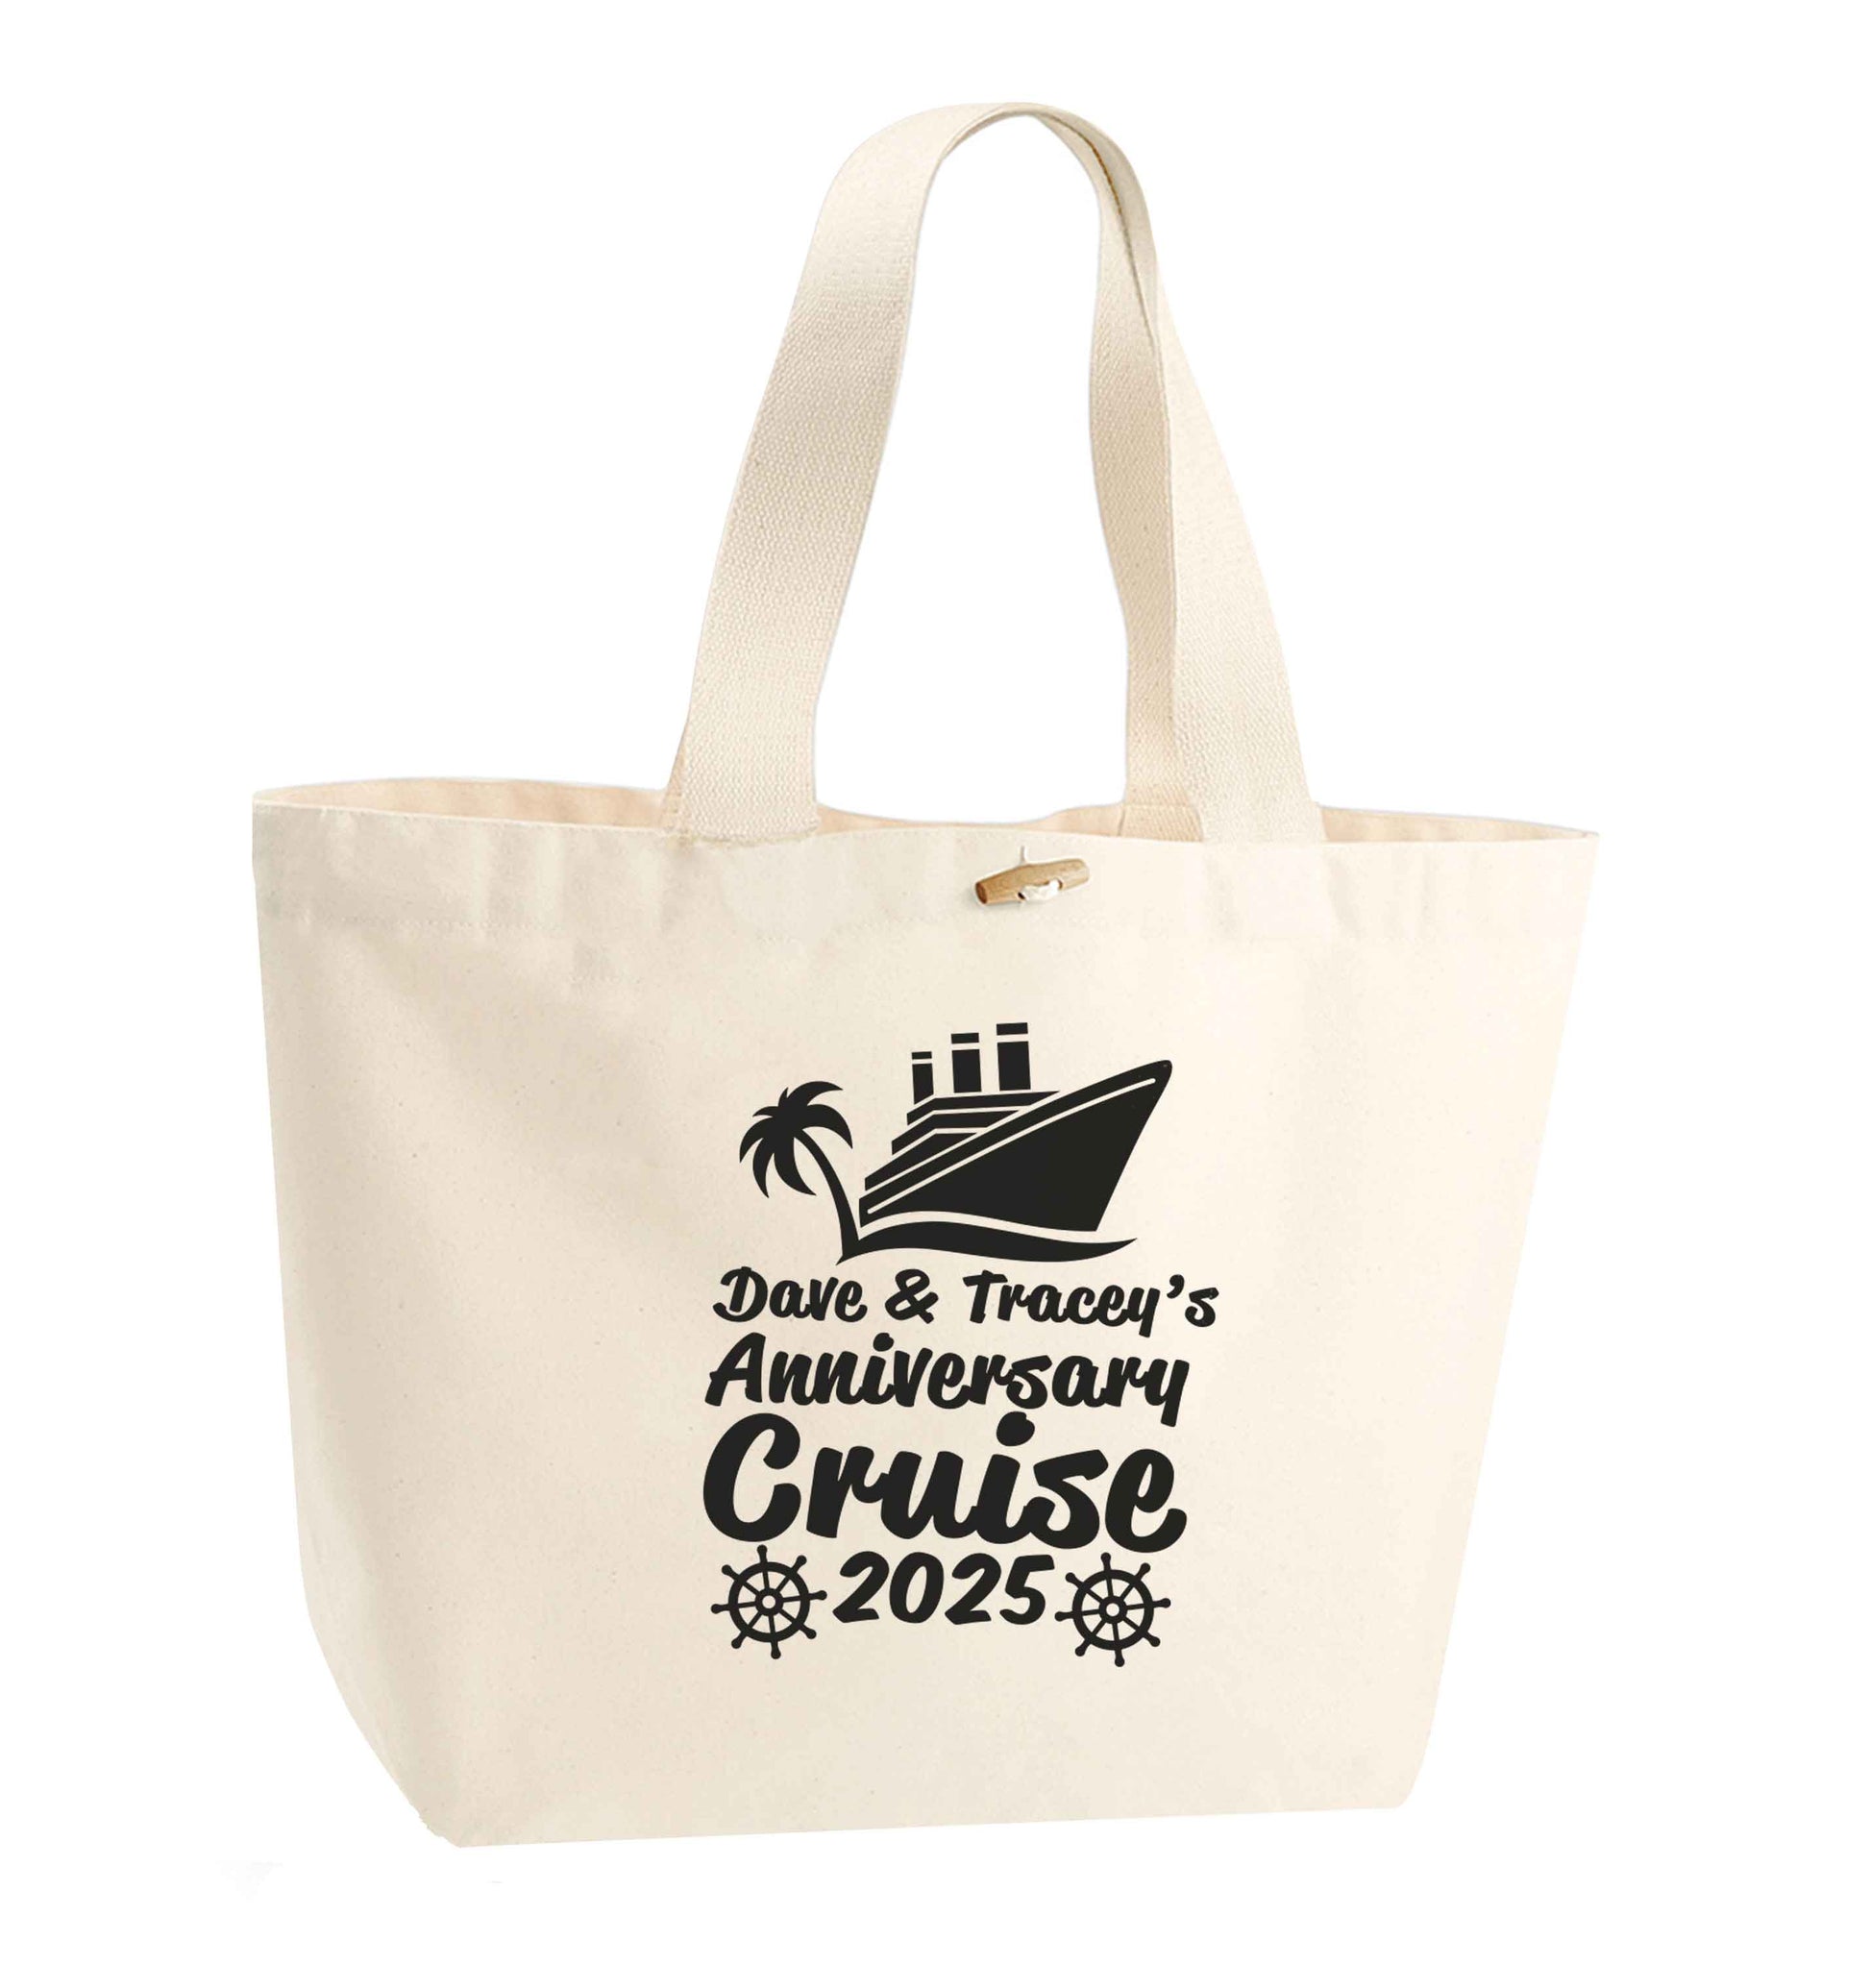 Personalised anniversary cruise organic cotton premium tote bag with wooden toggle in natural